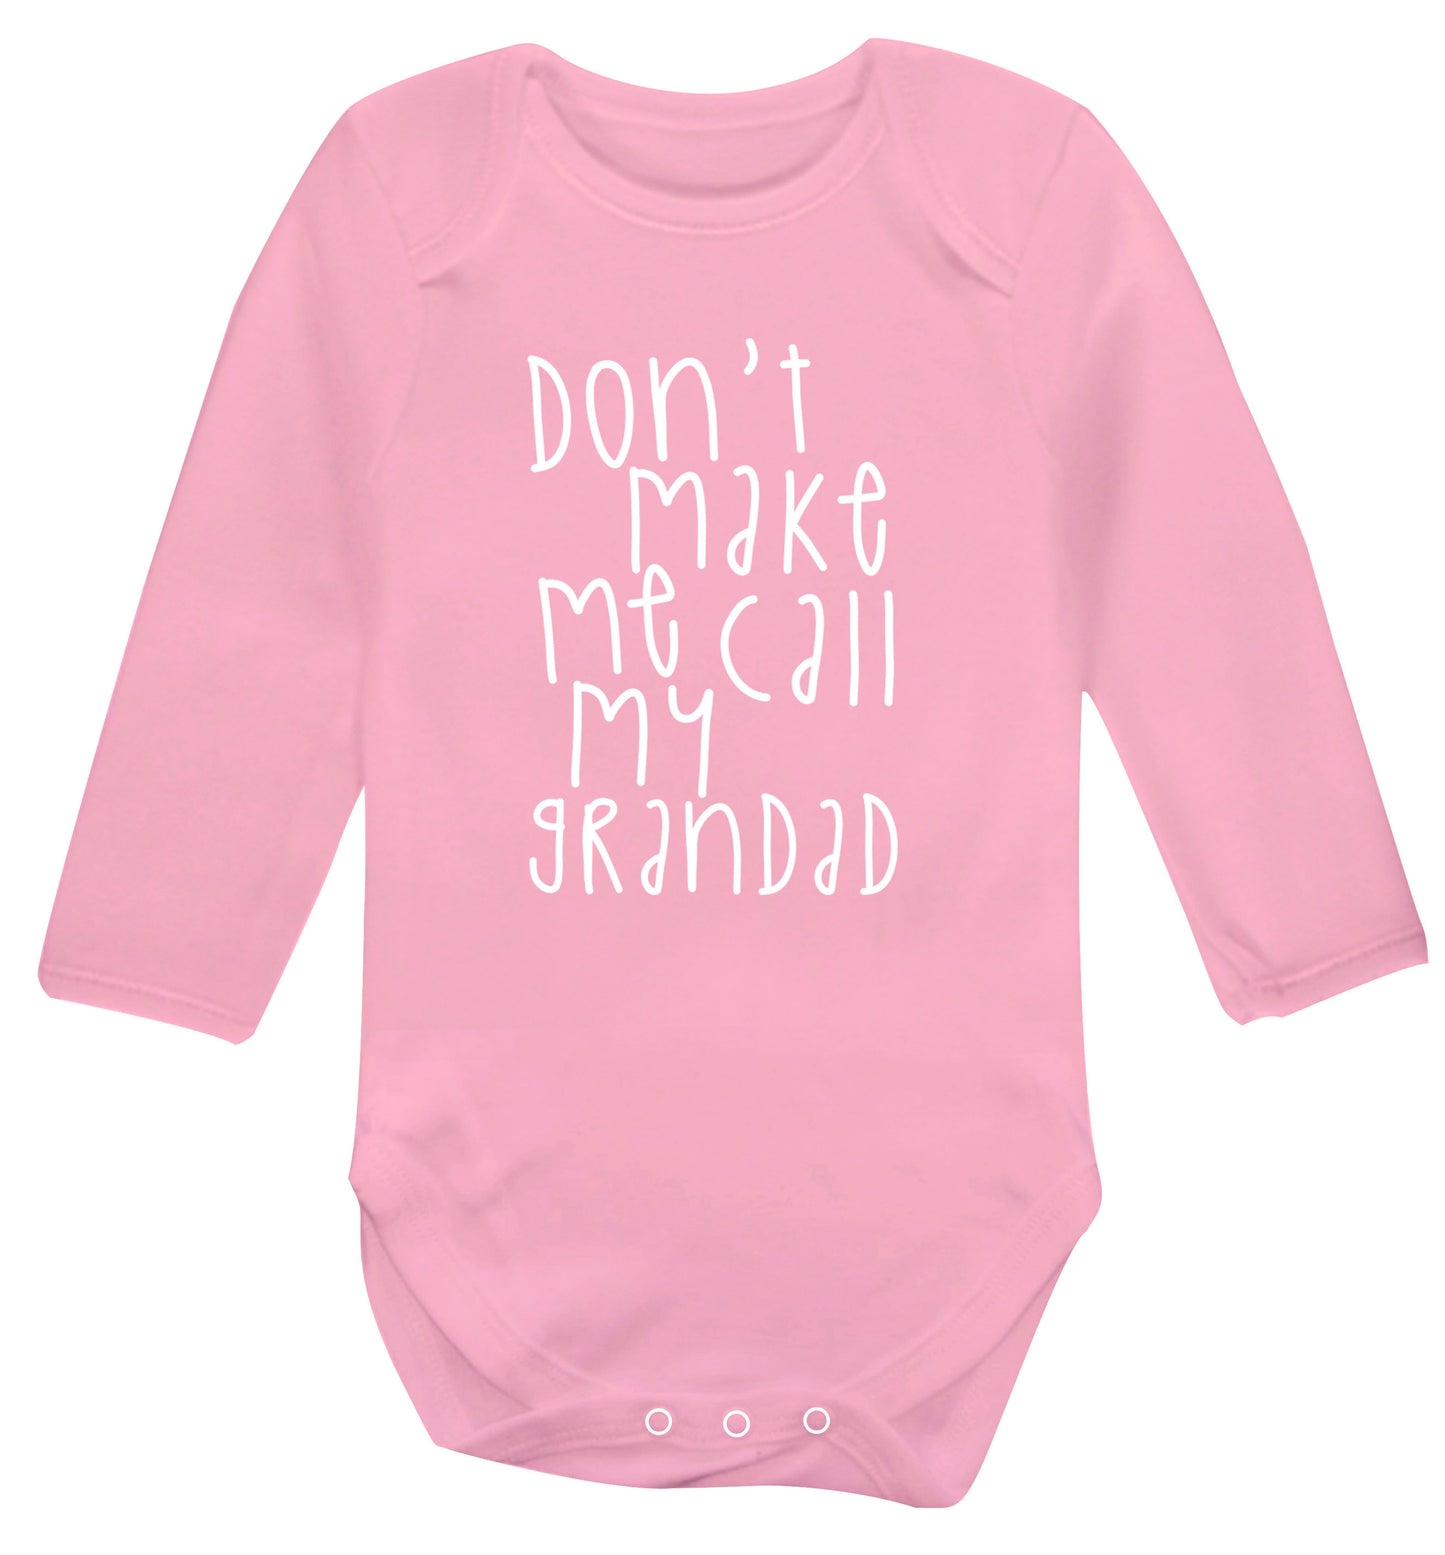 Don't make me call my grandad Baby Vest long sleeved pale pink 6-12 months